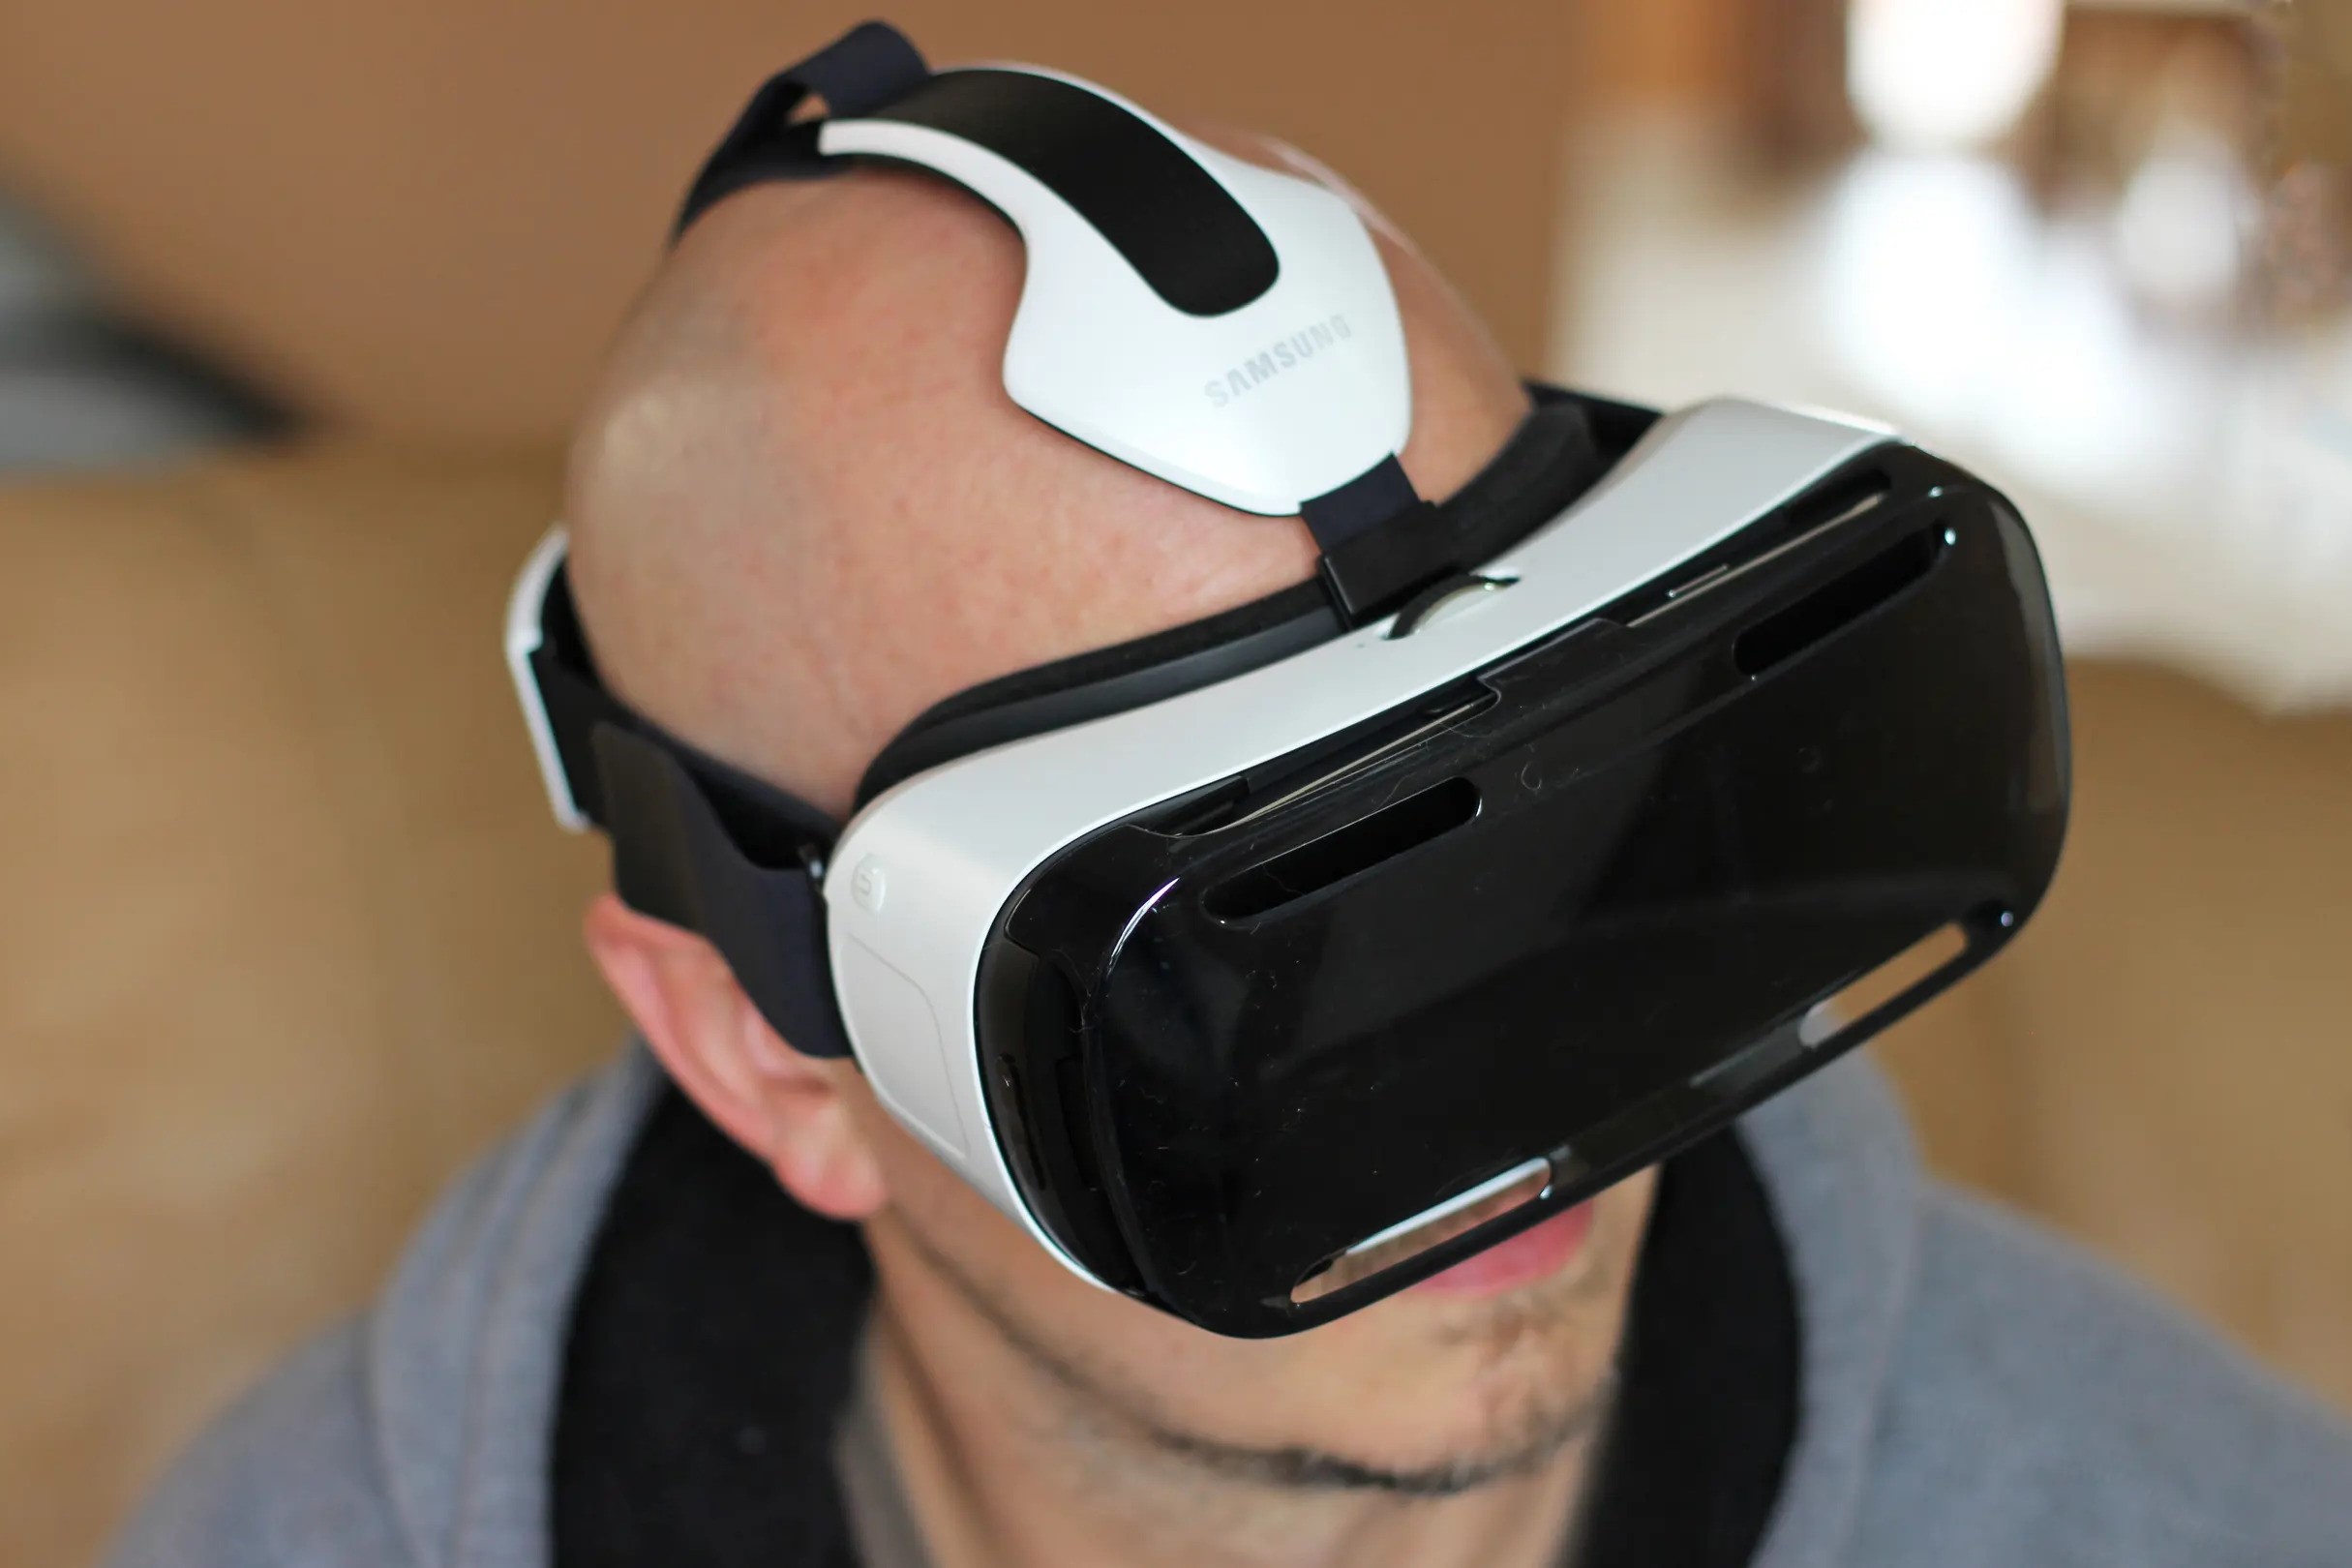 samsungs-vr-offering-an-overview-of-the-galaxy-gear-vr